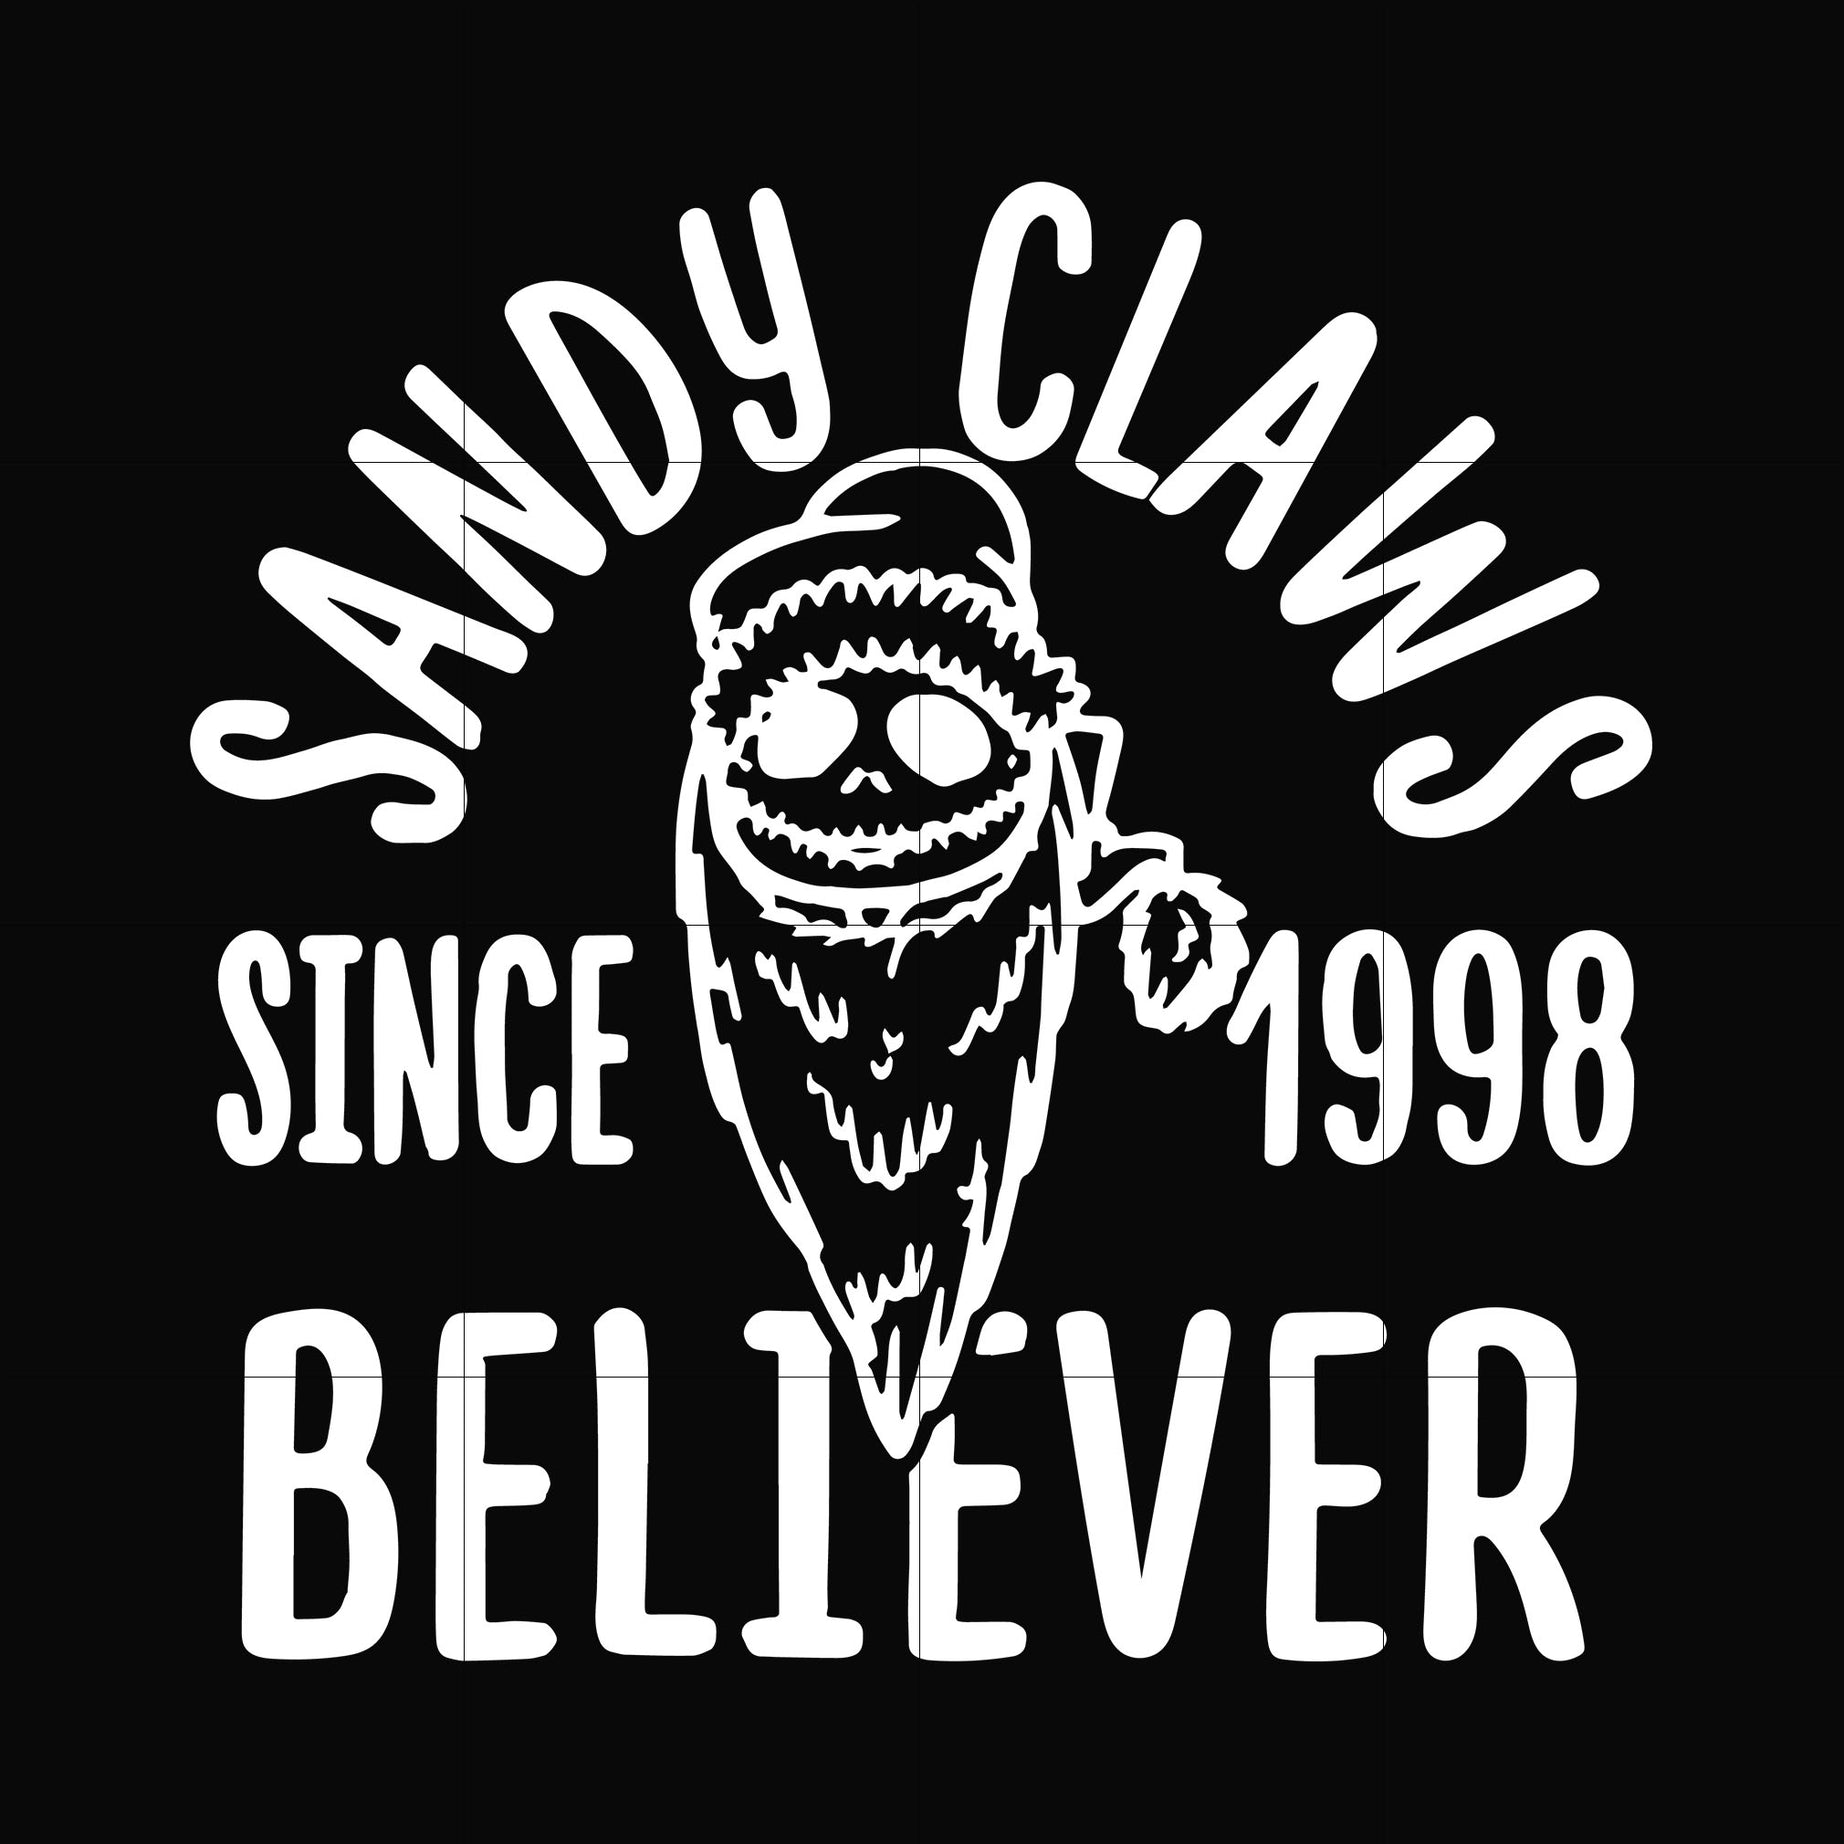 Sandy claws sine 1998 believer svg, png, dxf, eps digital file NCRM0107